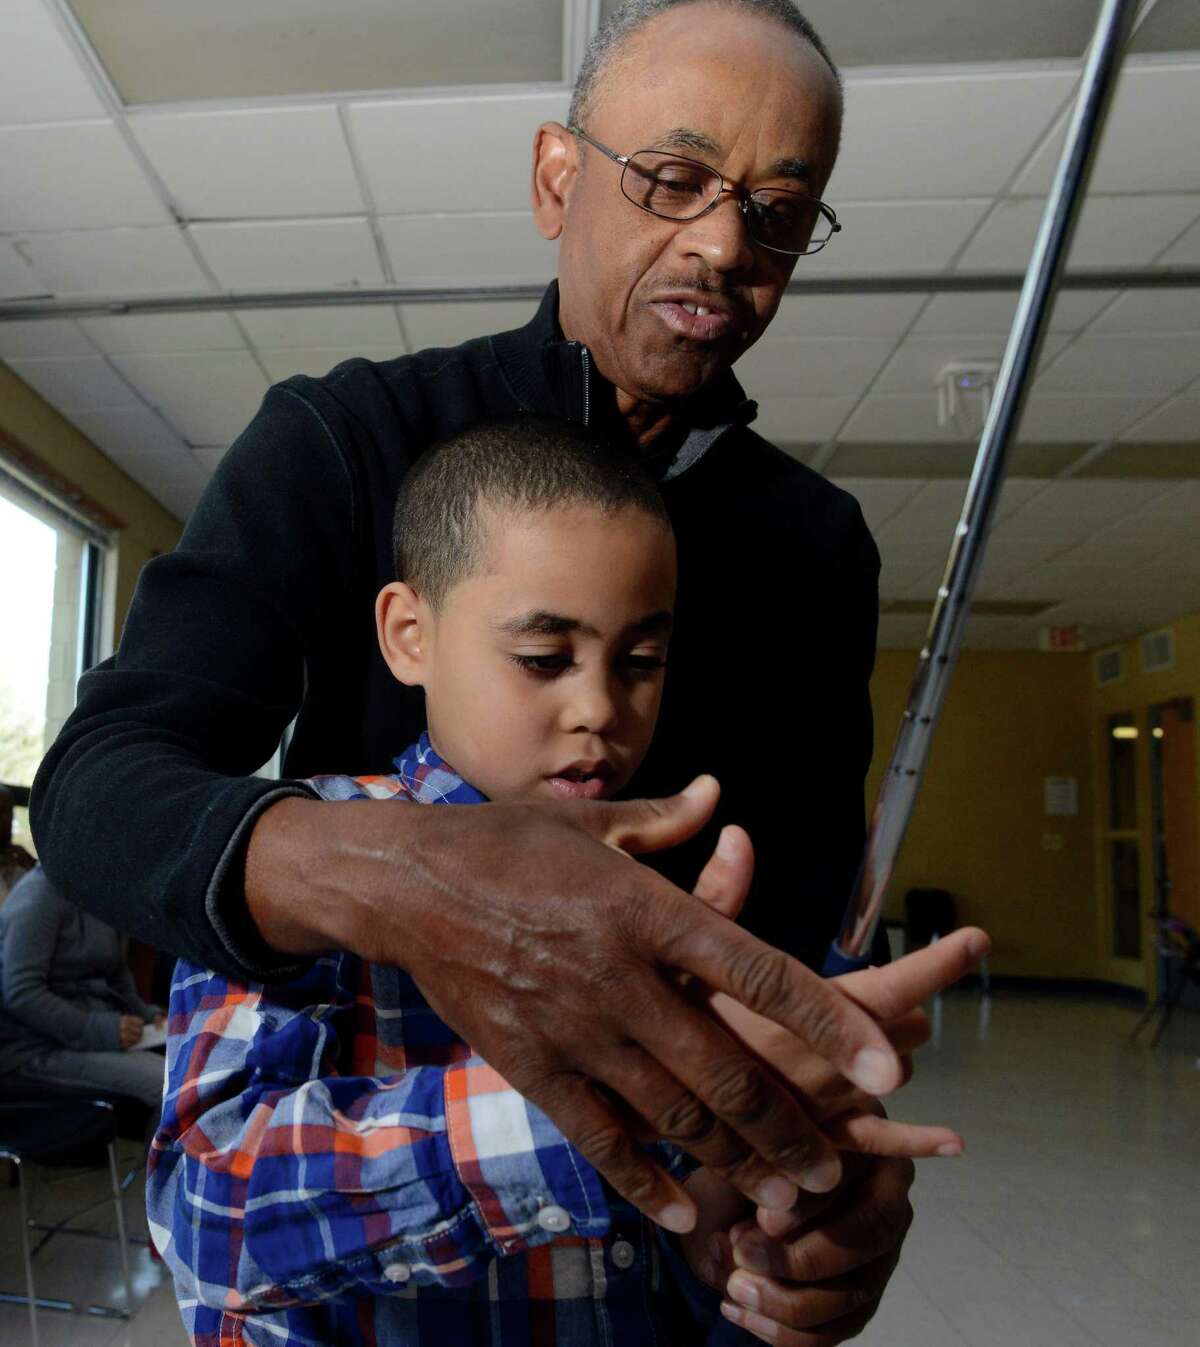 Mentor Duane Hill works with Yaniel Pascual on the proper way to grip a club during the 100 Youth Golf program at the Addison Community Center in Stamford, Conn on March 13, 2016. This is the fourth time the youth golf program has been offeded and run by the 100 Black Men of Stamford, an organization that mentors African-American and Latino teens.